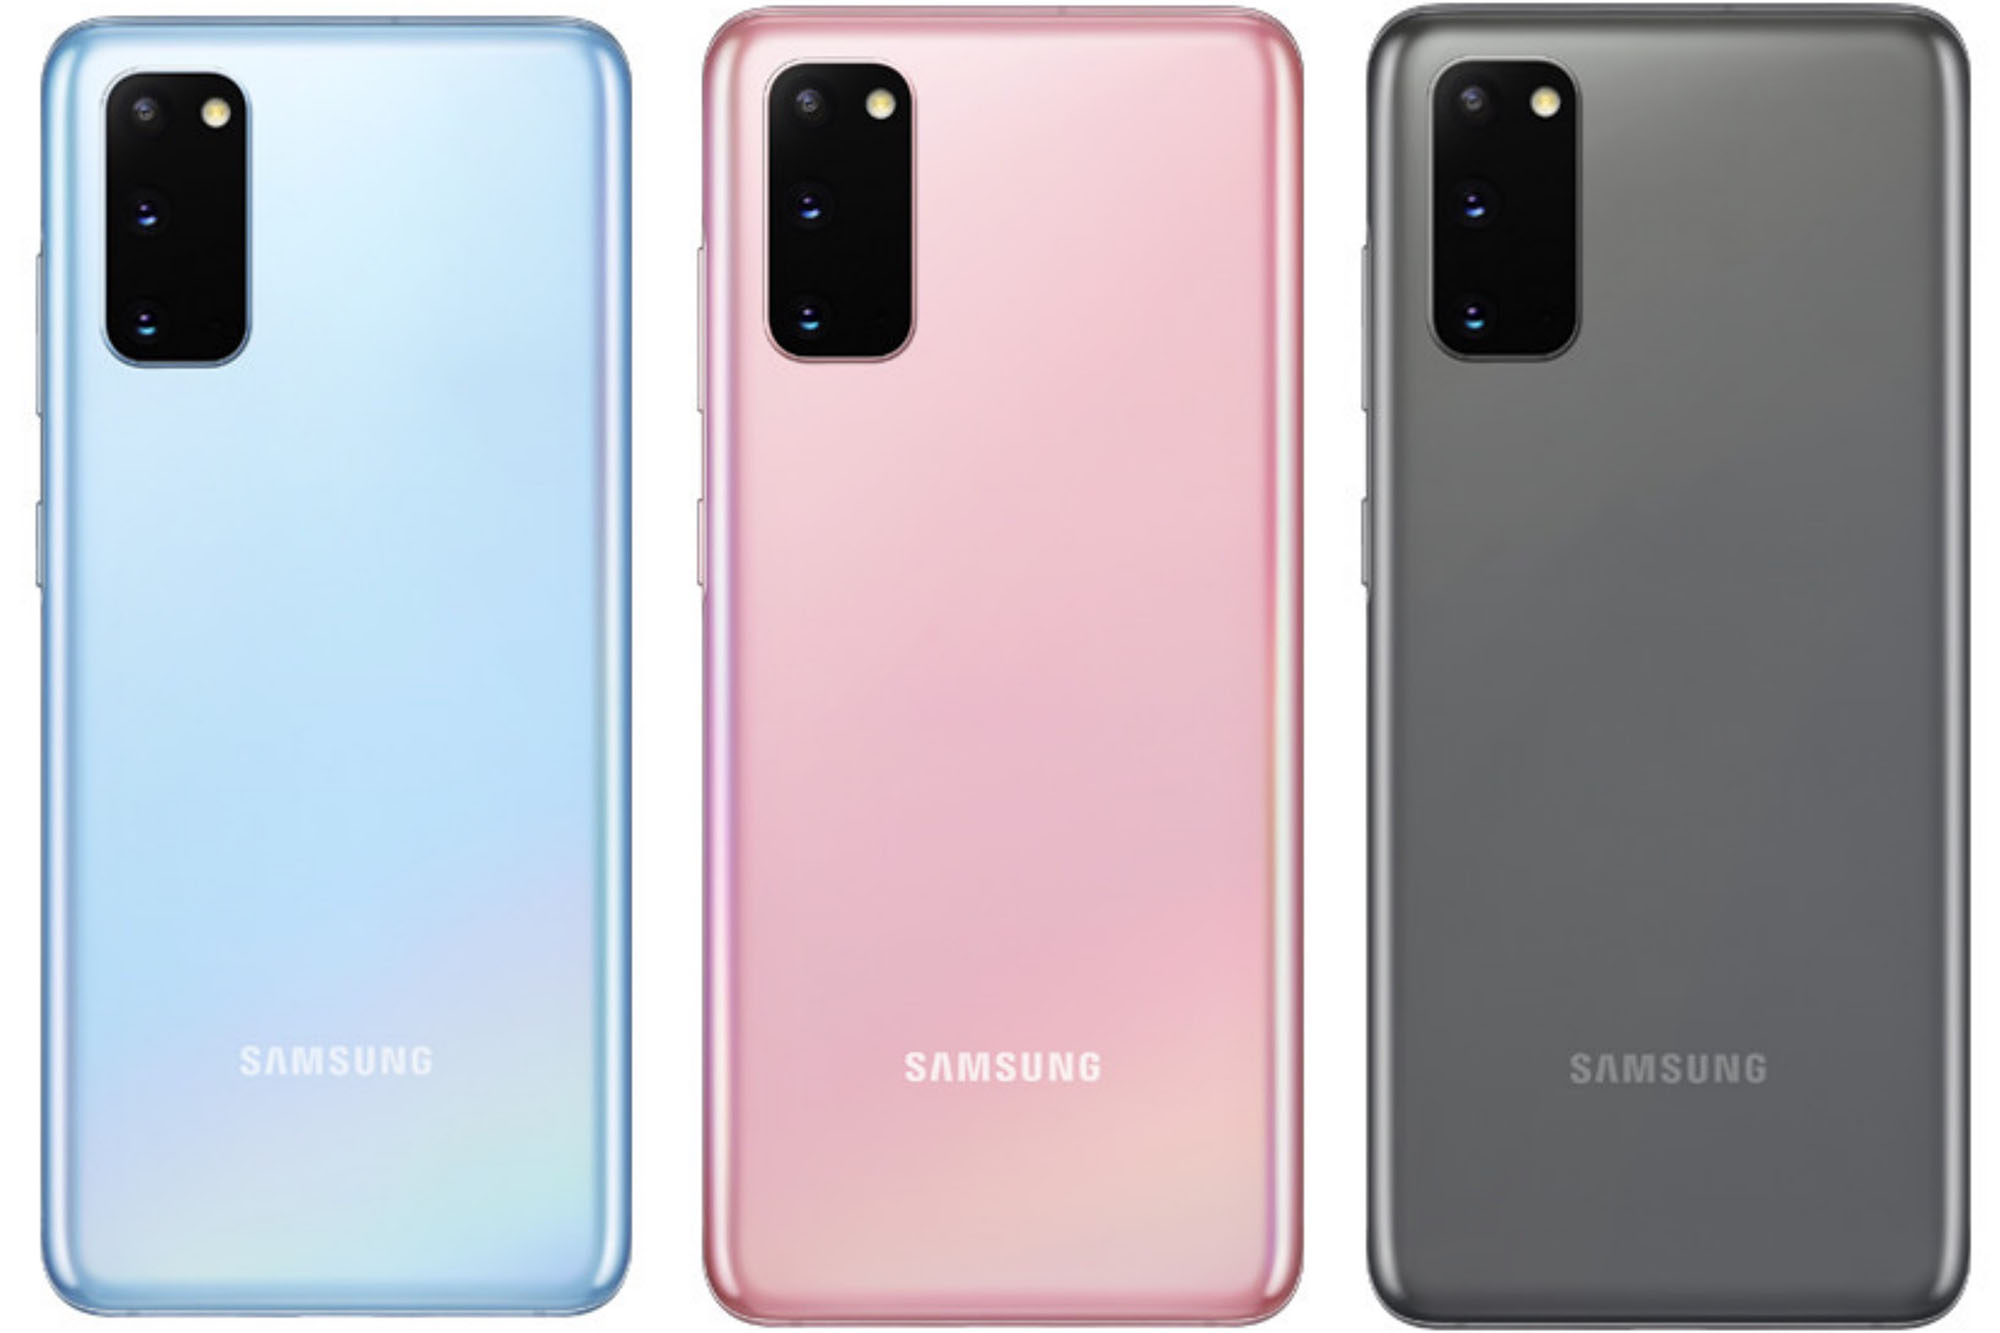 All-the-Galaxy-S20-S20-and-Ultra-launch-colors-cosmic-and-cloudy.jpg